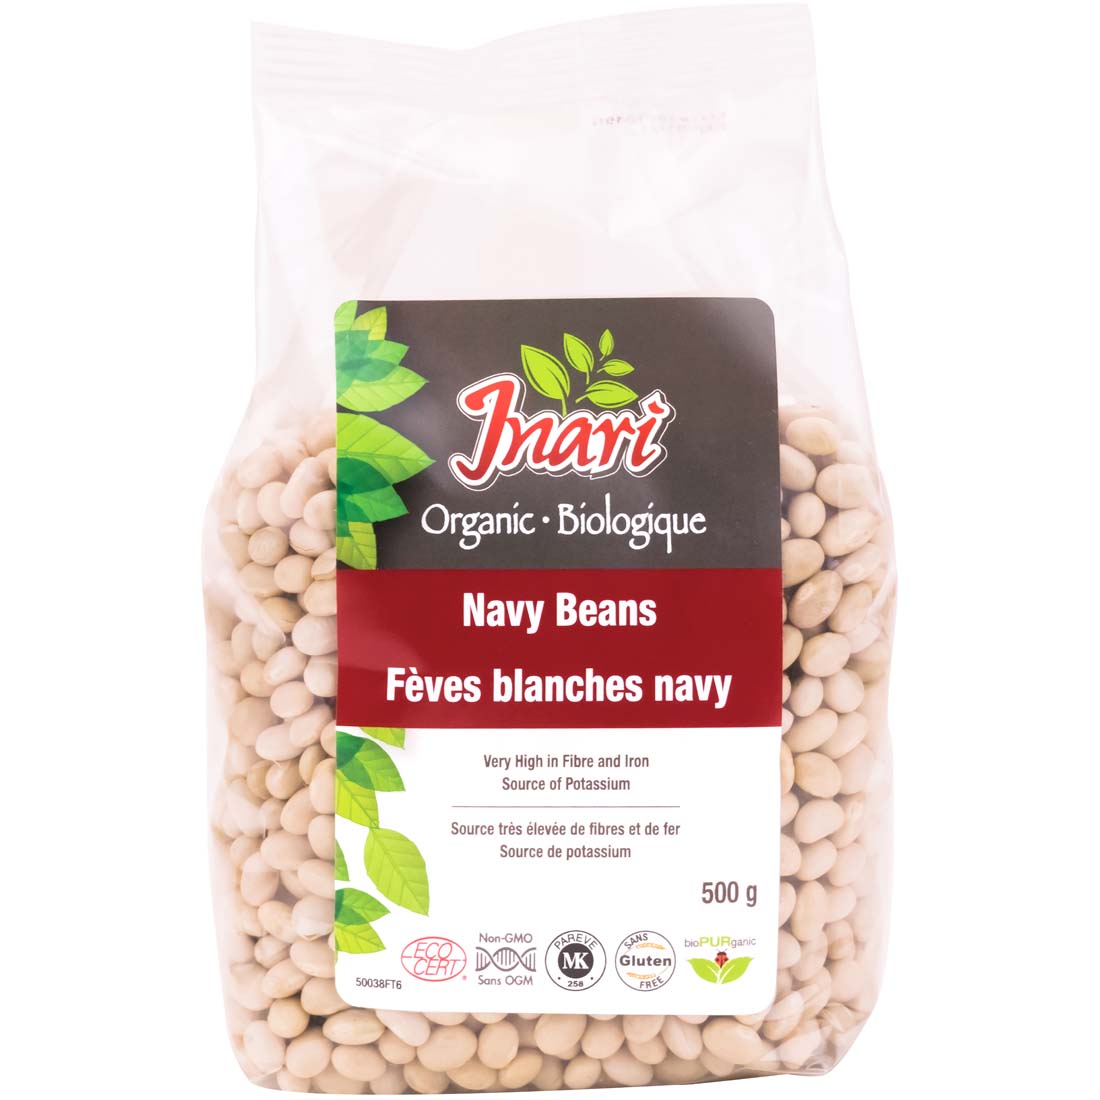 Inari Organic Navy Beans, 500g, Clearance 30% Off, Final Sale